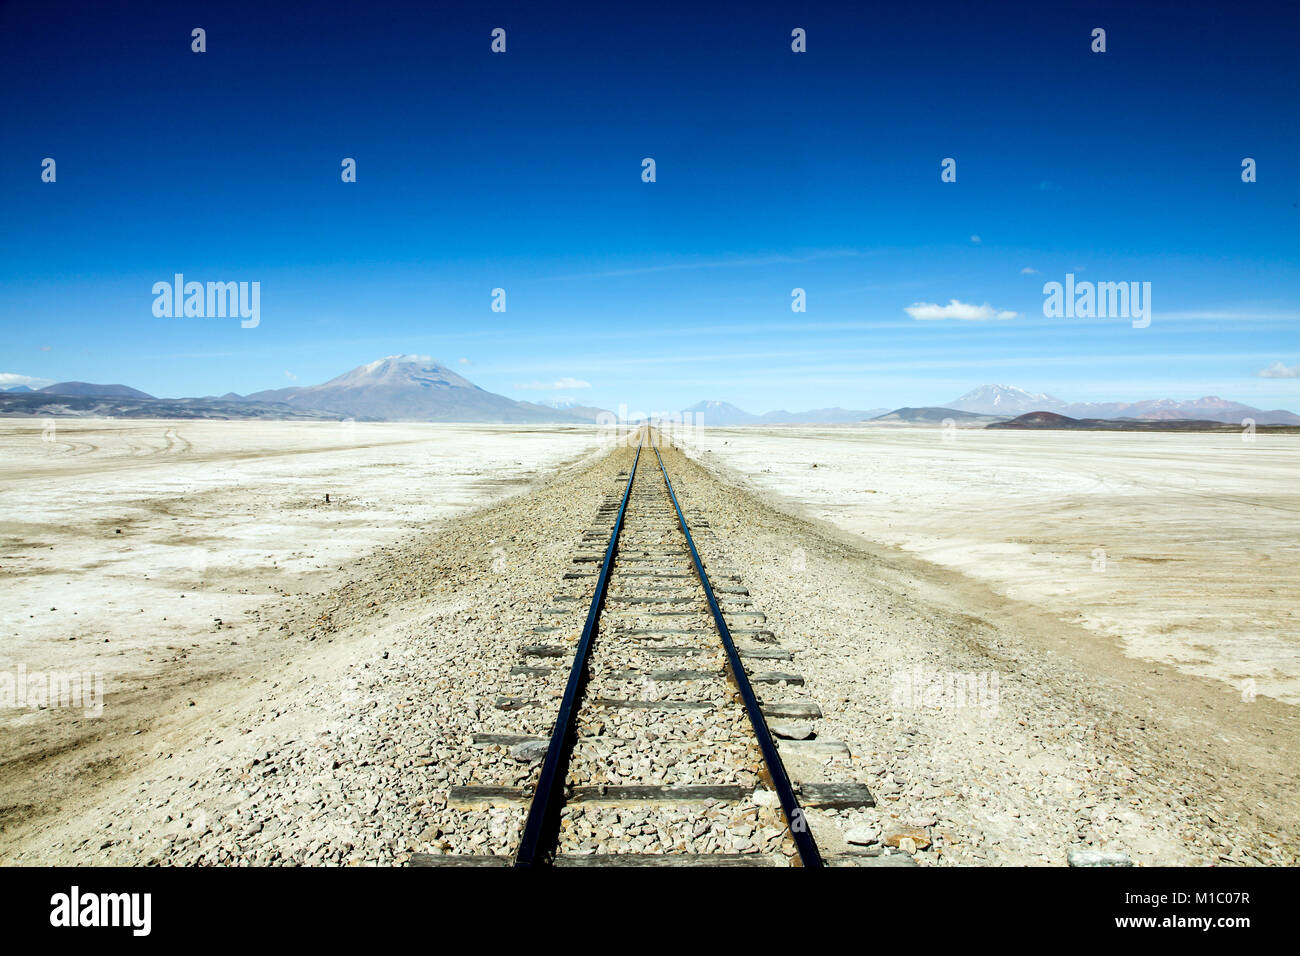 Sur L’pez or Sud L’pez Province, Altiplano of Bolivia, 2011: tracks in the middle of the desert Stock Photo